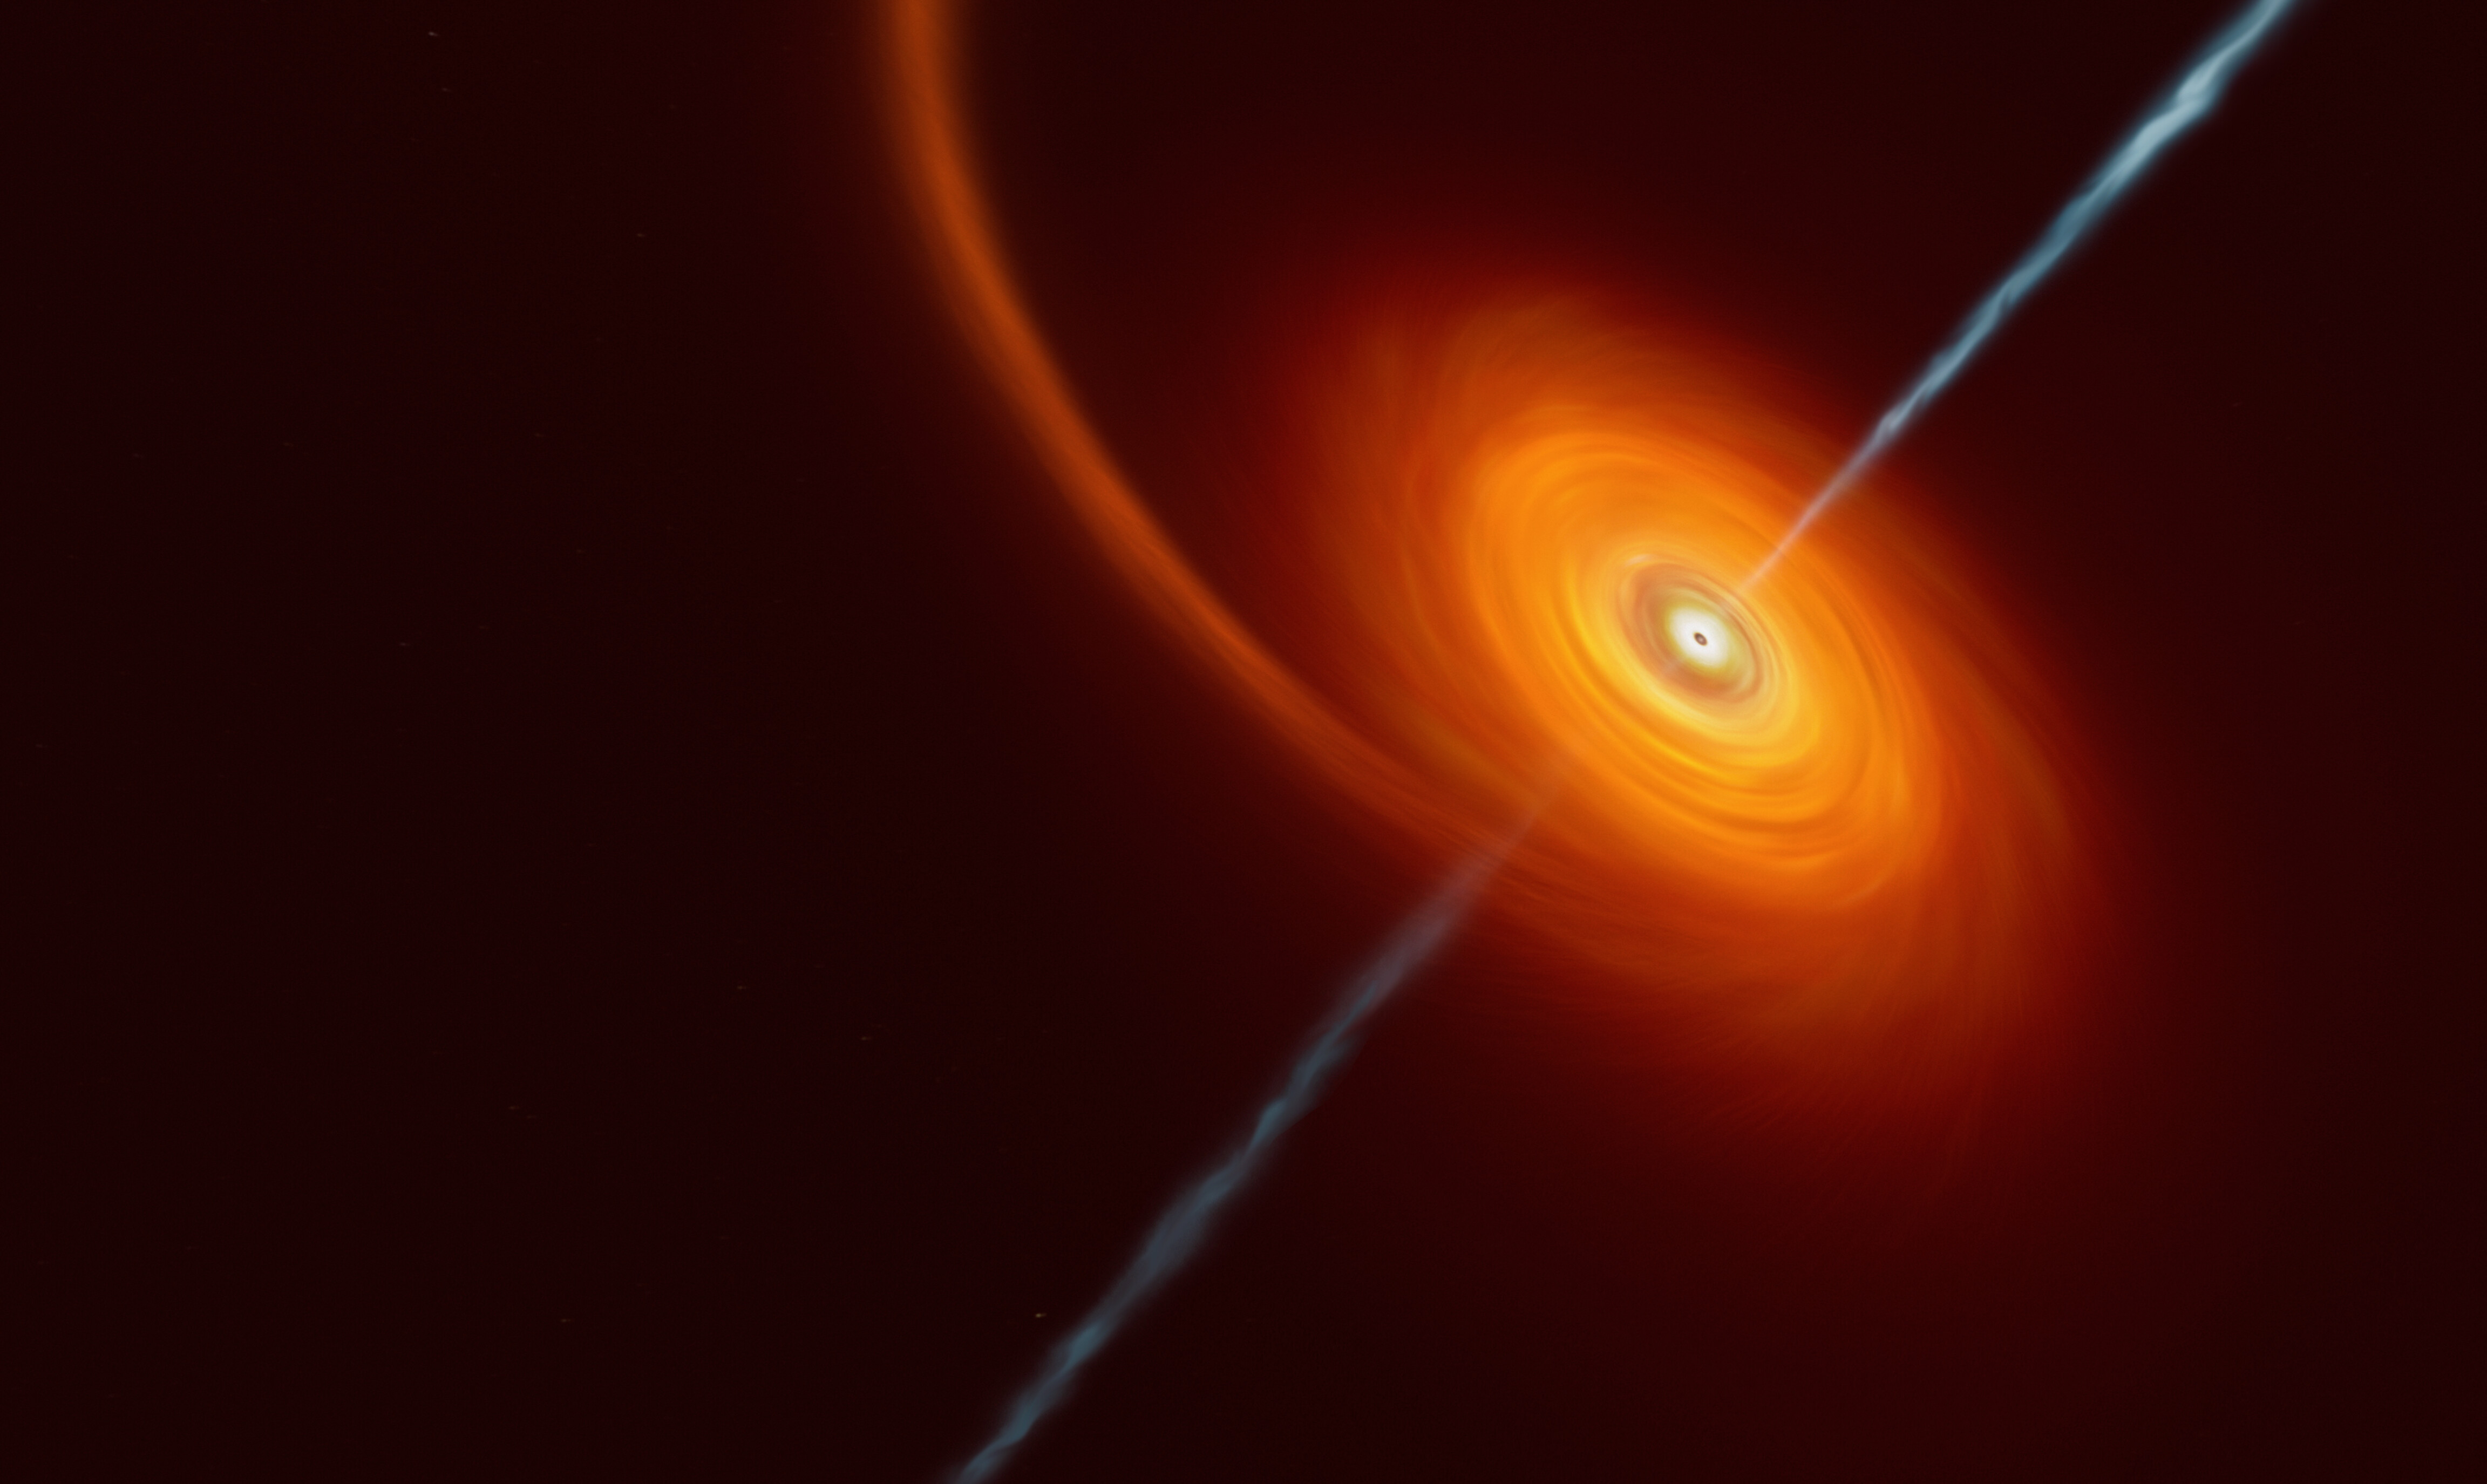 A star being squeezed by the intense gravitational pull of the black hole